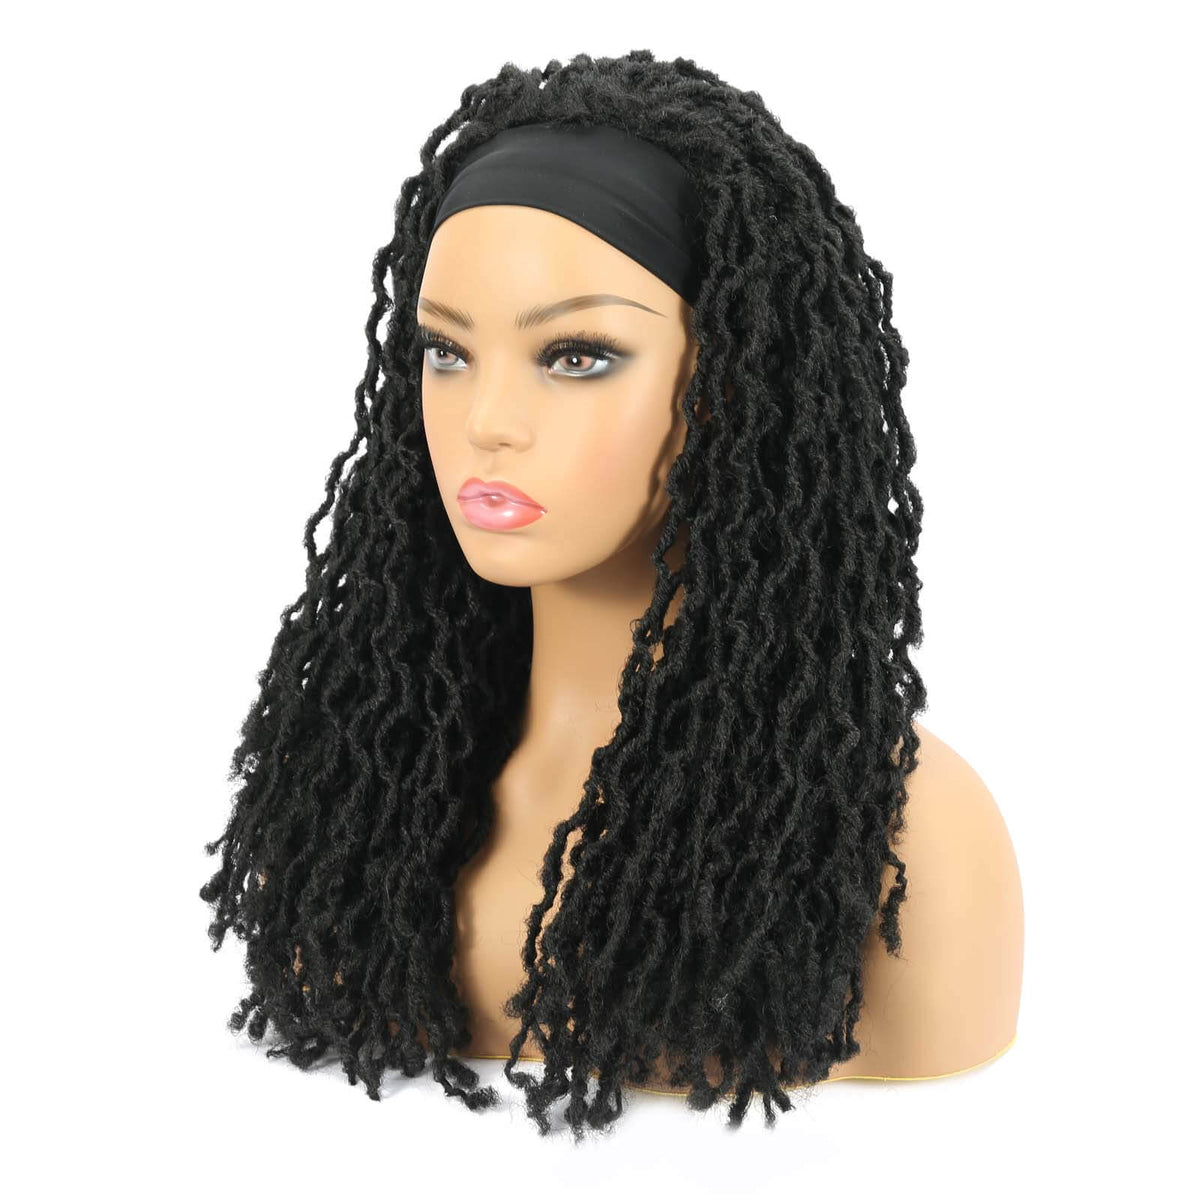 Nu Locs Headband Wigs for Black Women Black Color Braided Wigs Side Show